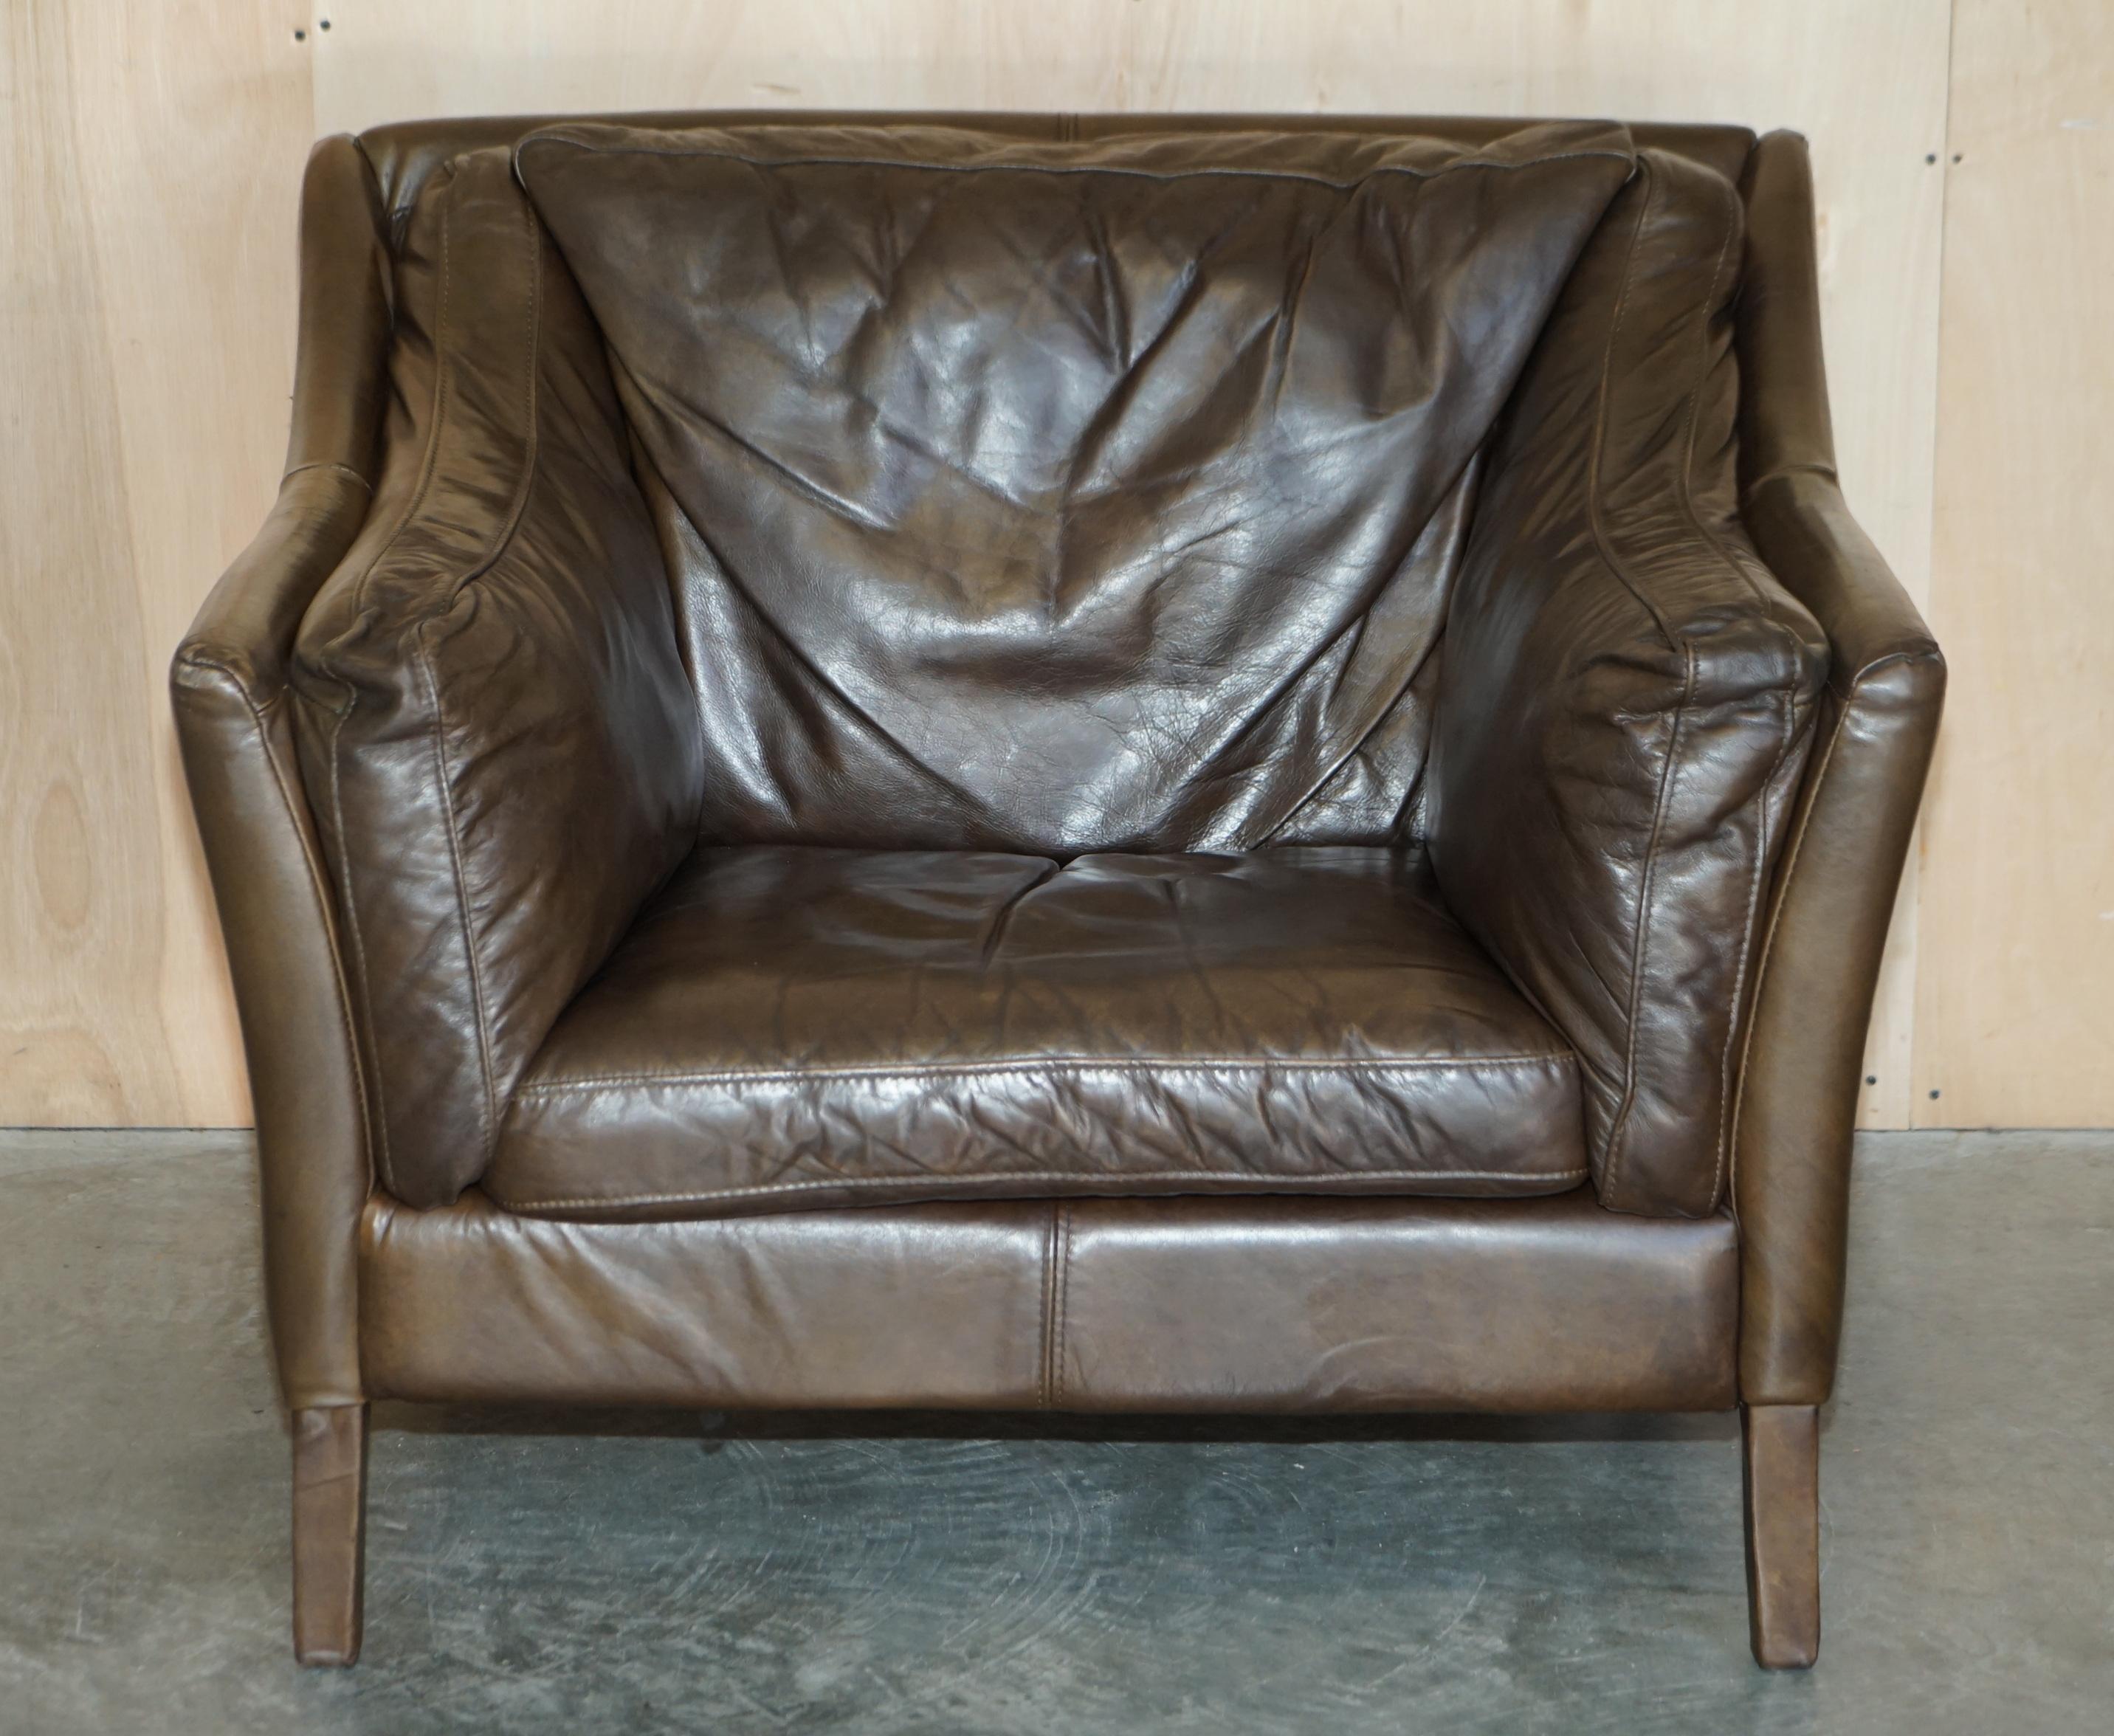 We are delighted to offer for sale this very comfortable Halo Reggio brown leather club armchair

A good looking and well made piece, it is super comfortable, stylish and finished in a nice cigar saddle brown

We have cleaned waxed and polished